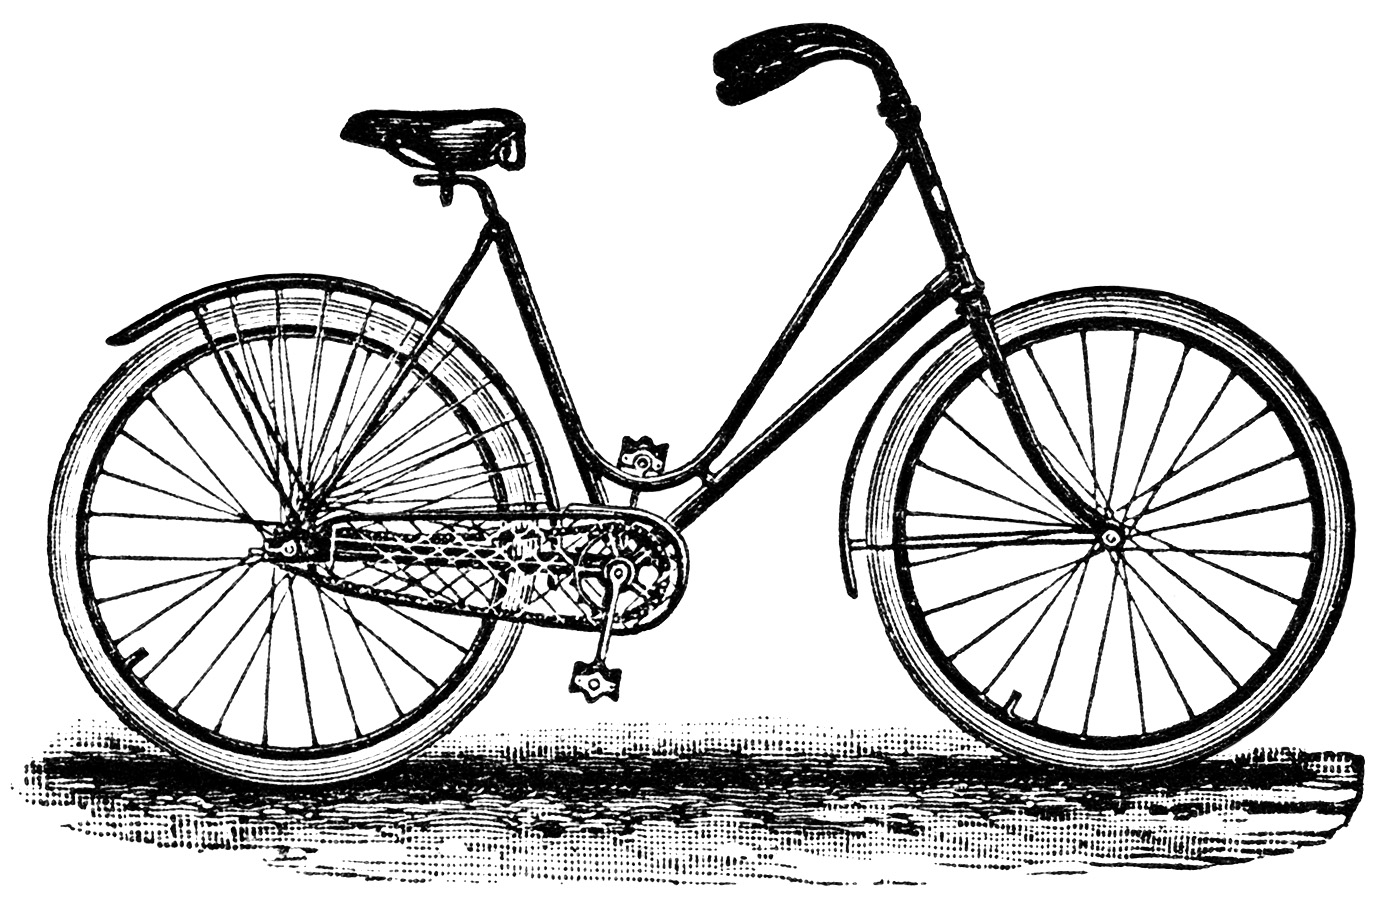 And A Black And White Clipart Version Of The Bicycle From The Ad